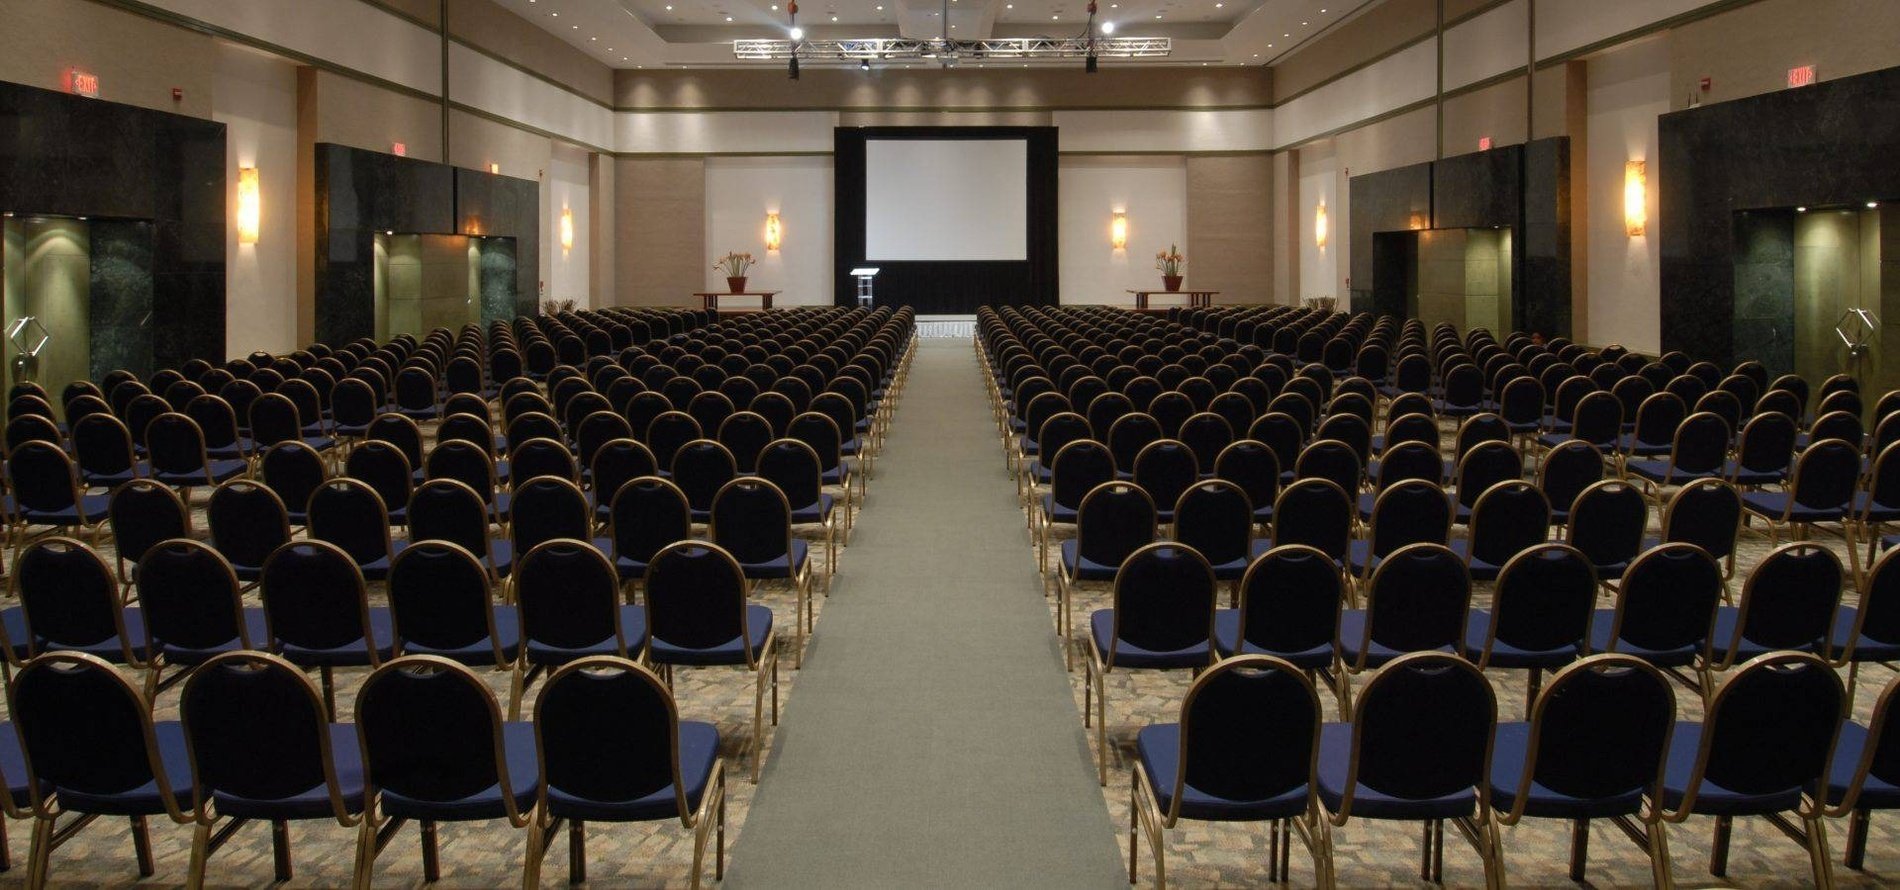 General view of the event room with chairs, lectern and projector at Park Royal hotels and resorts